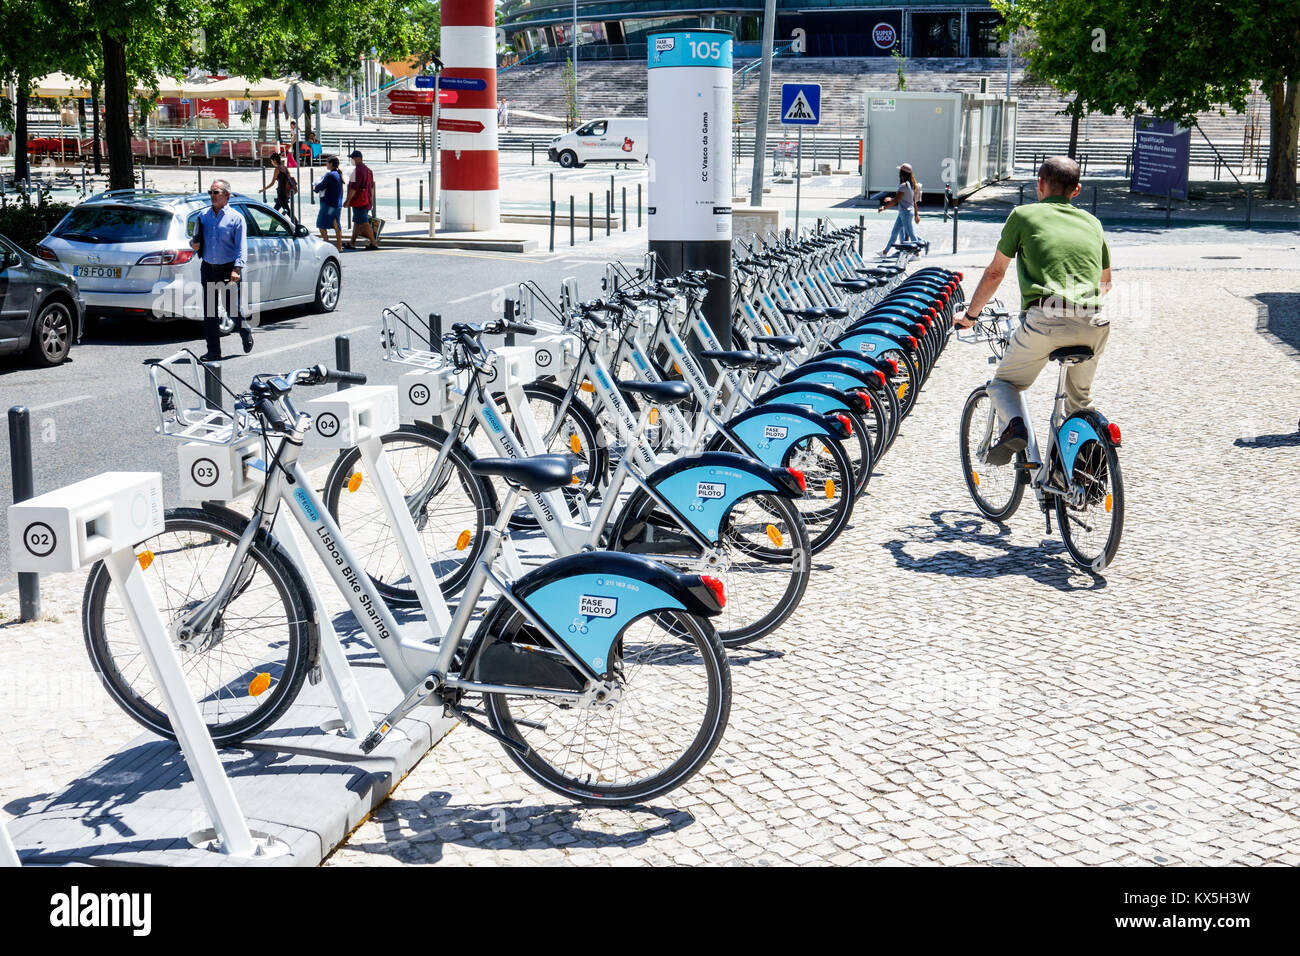 Lisbon Portugal,Oriente,Parque das Nacoes,Park of the Nations,bike share system,bicycle bicycles bicycling riding biking rider riders bike bikes,stati Stock Photo